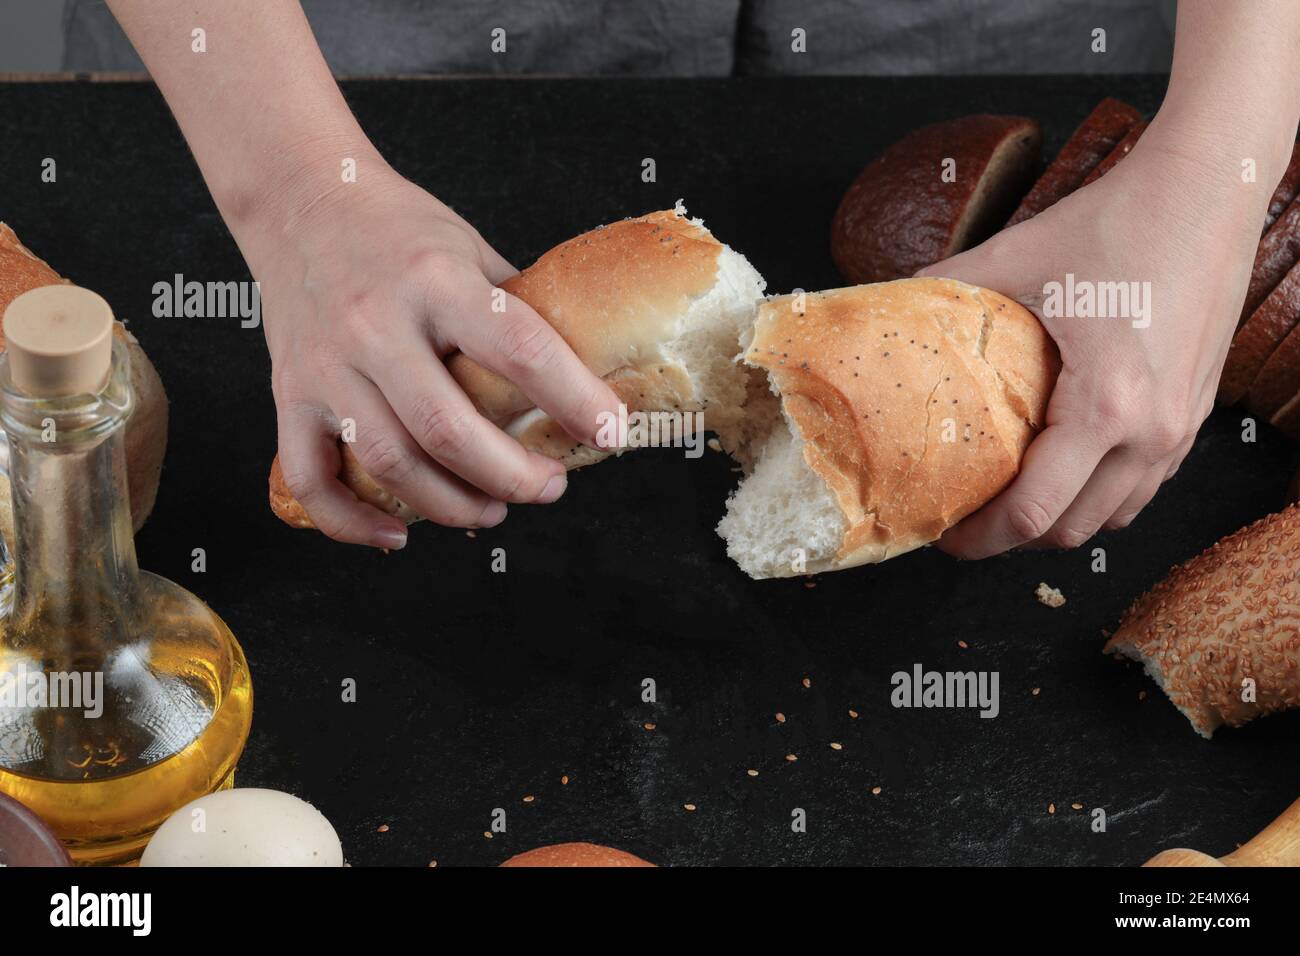 Woman cut bread into half on dark table with eggs and glass of oil Stock Photo